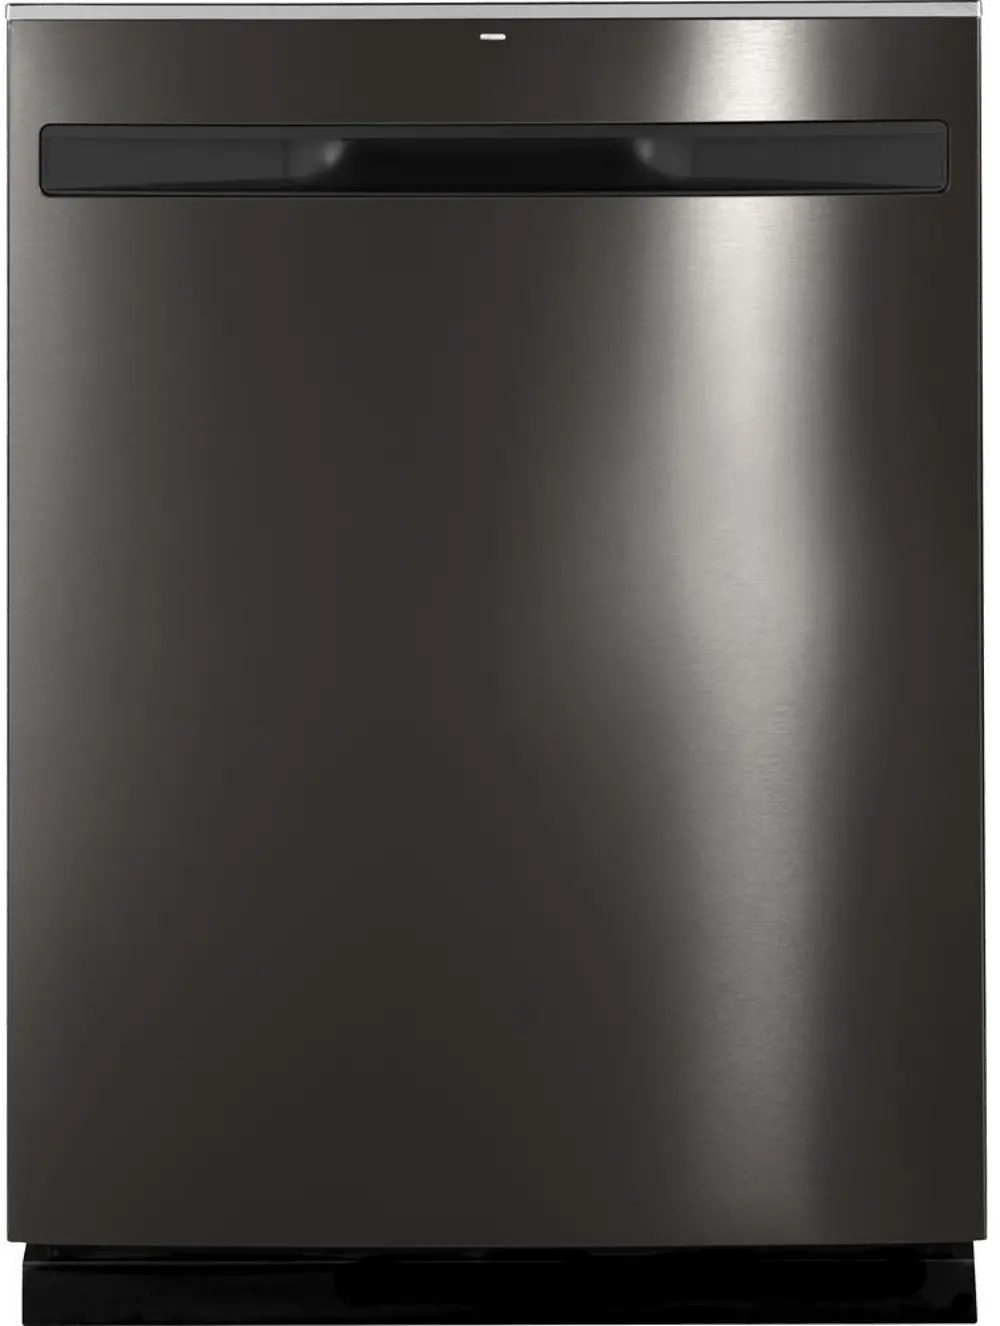 GDP615HBMTS GE Dishwasher - Black Stainless Steel-1